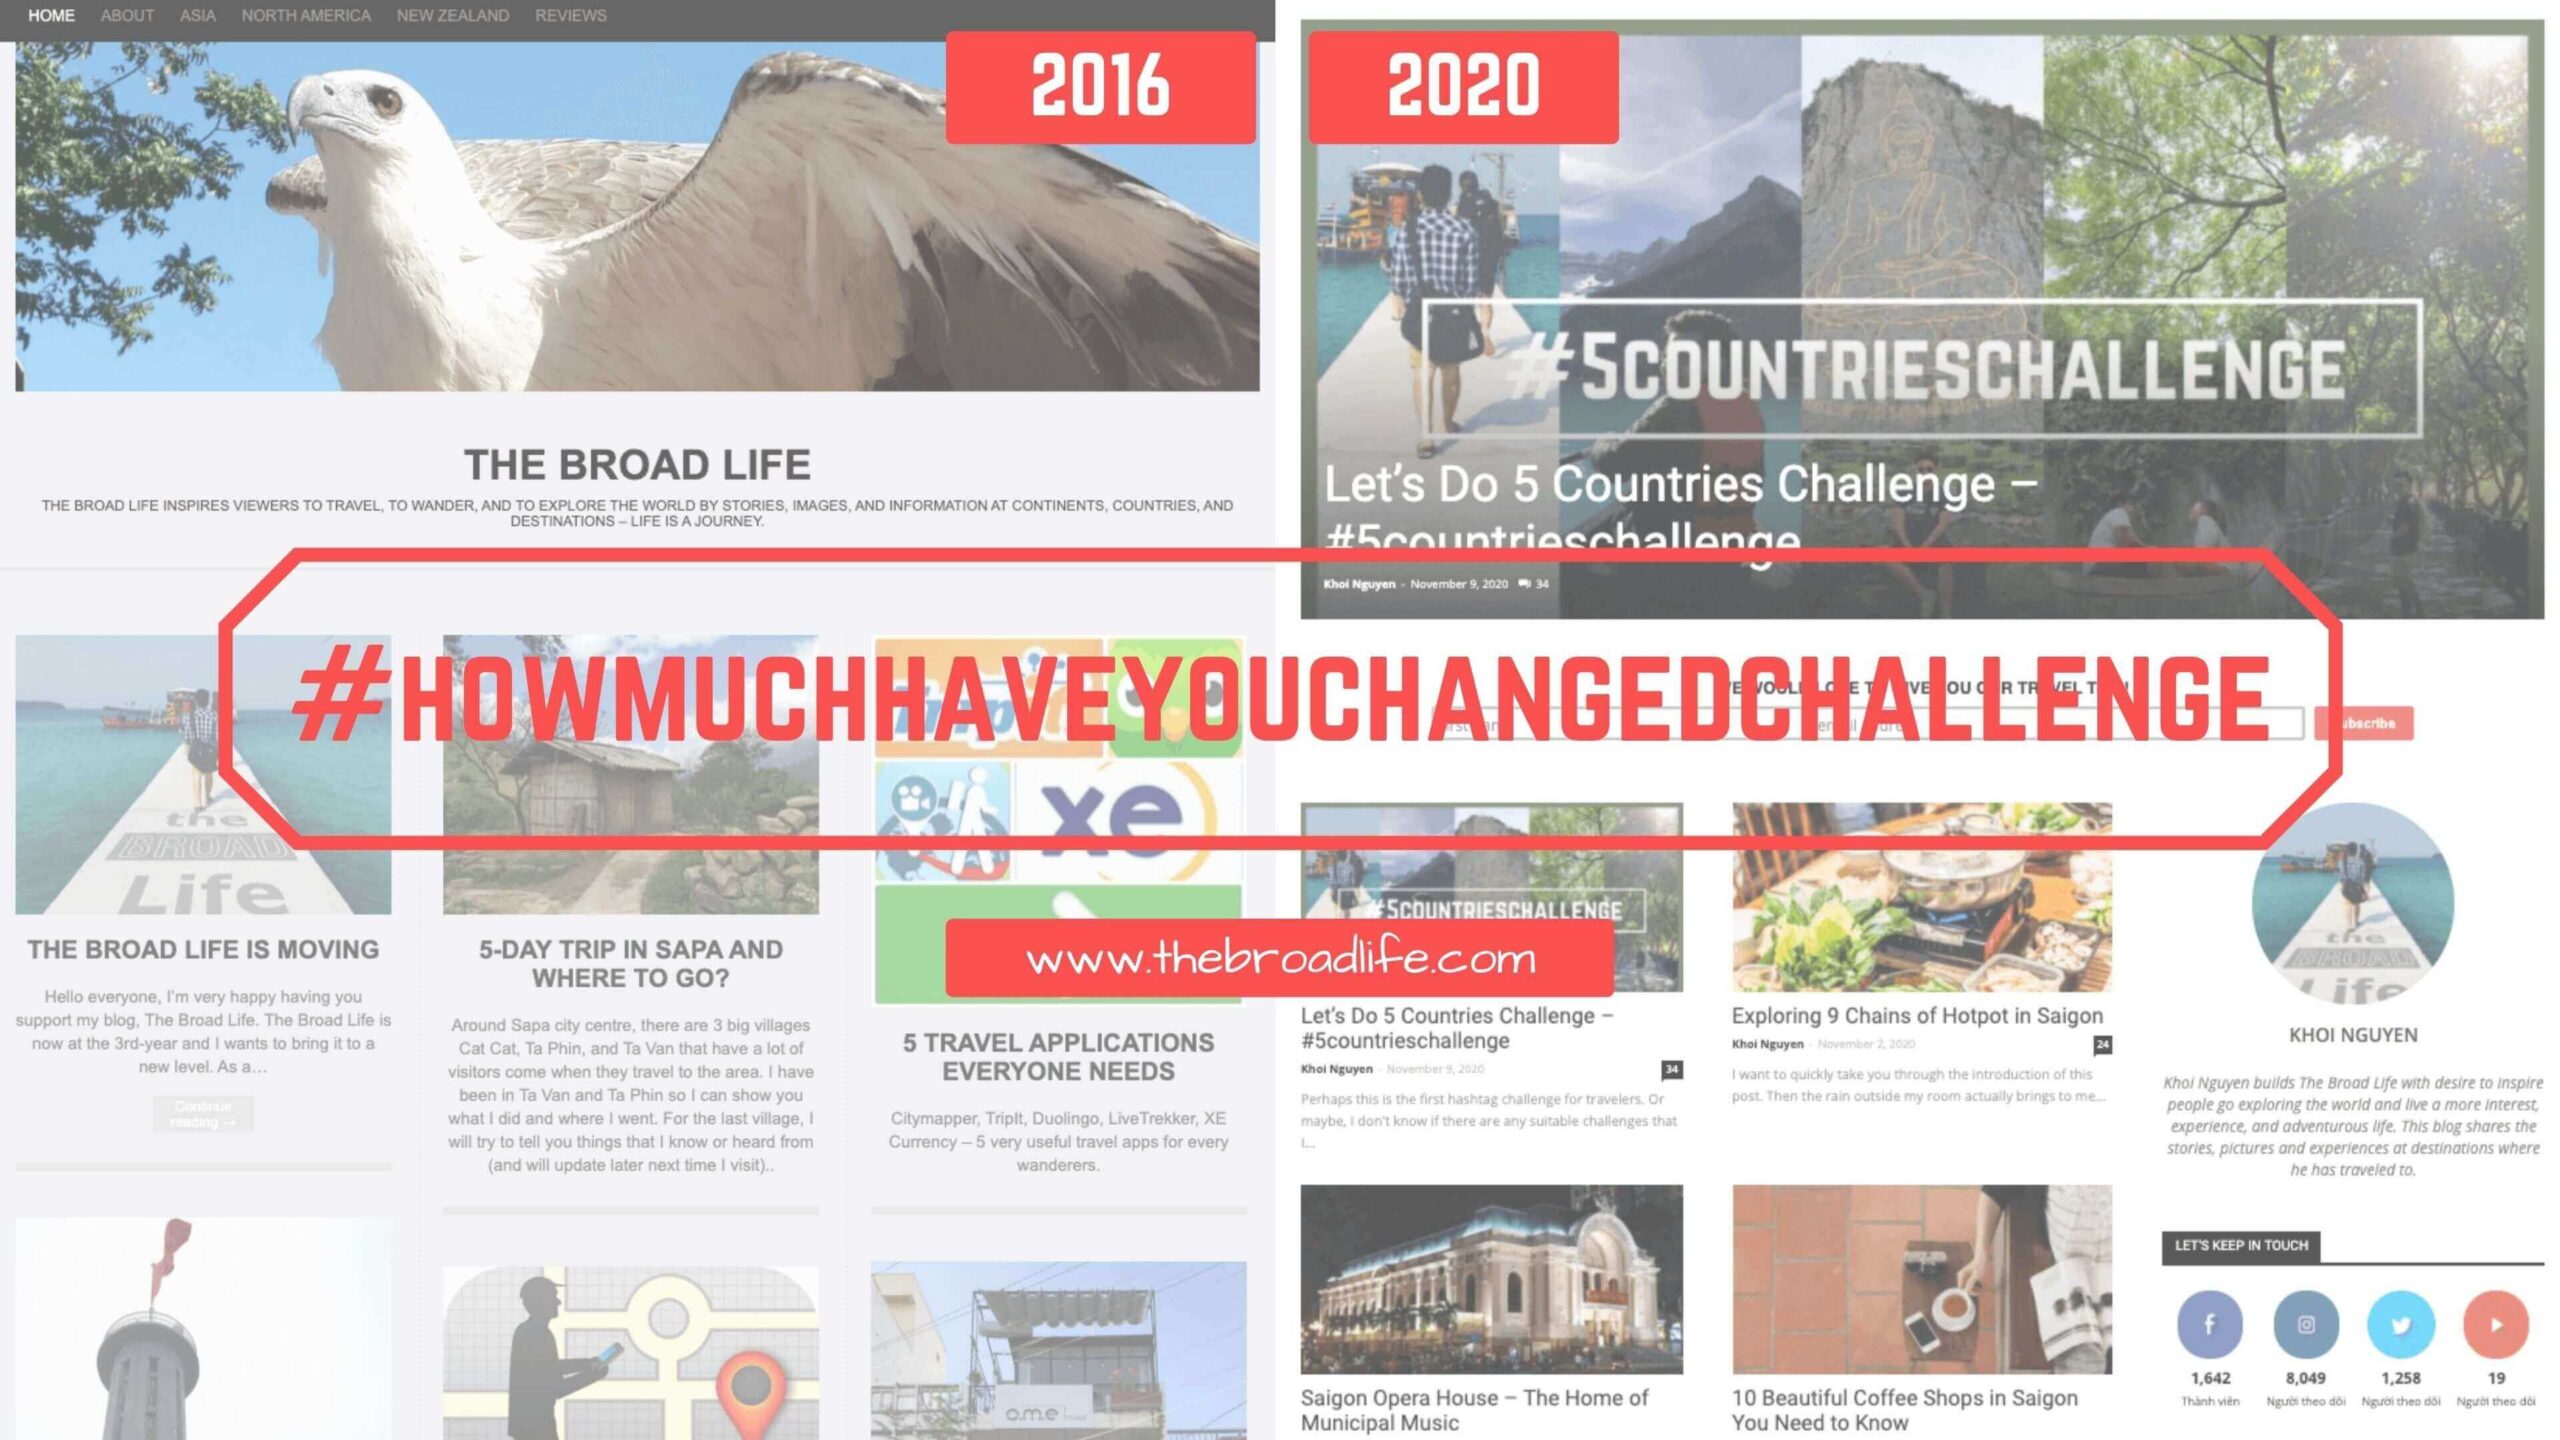 It’s #howmuchhaveyouchangedchallenge – Let’s See What The Broad Life Changed!